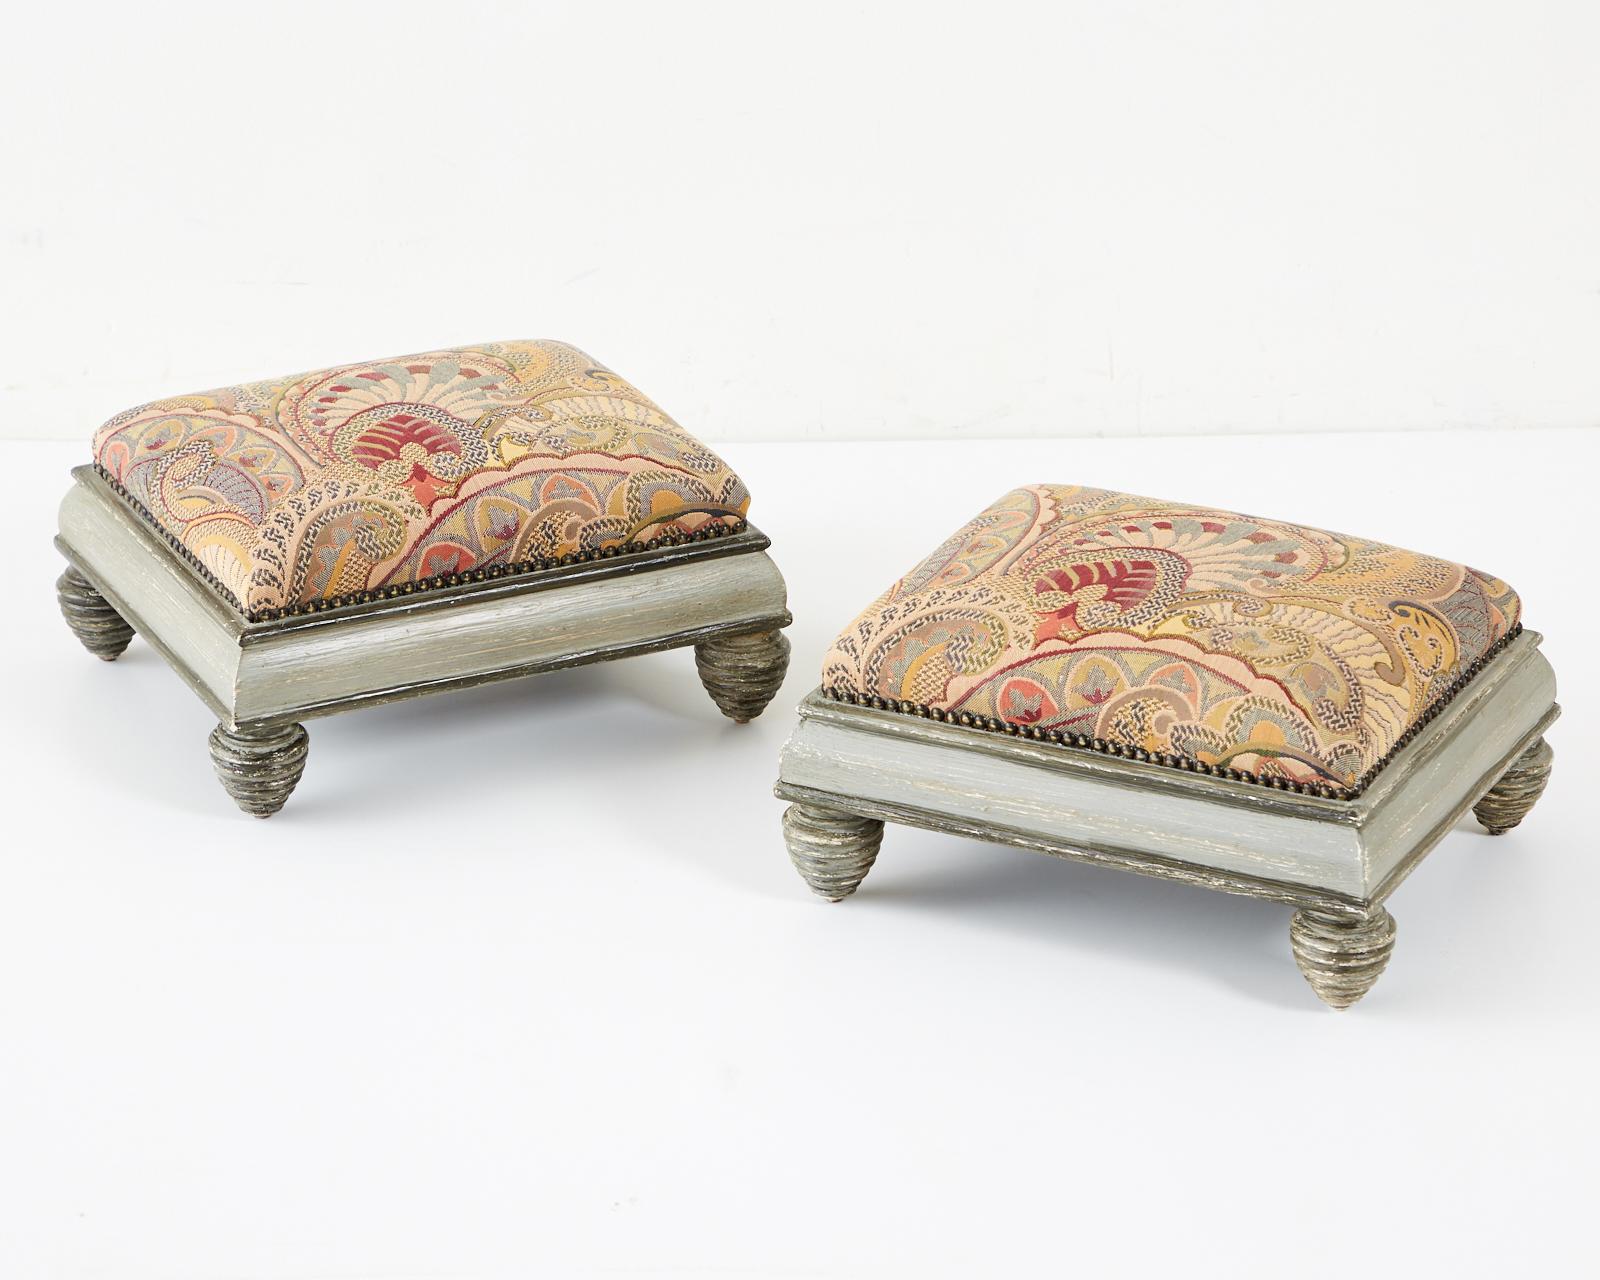 Rare pair of French Mid-Century Modern footstools by Brunschwig and Fils. Beautifully crafted near square frames with a lacquered gray two-tone finish. The decorative arts style fabric has a paisley motif and is bordered by brass tack nailheads. The